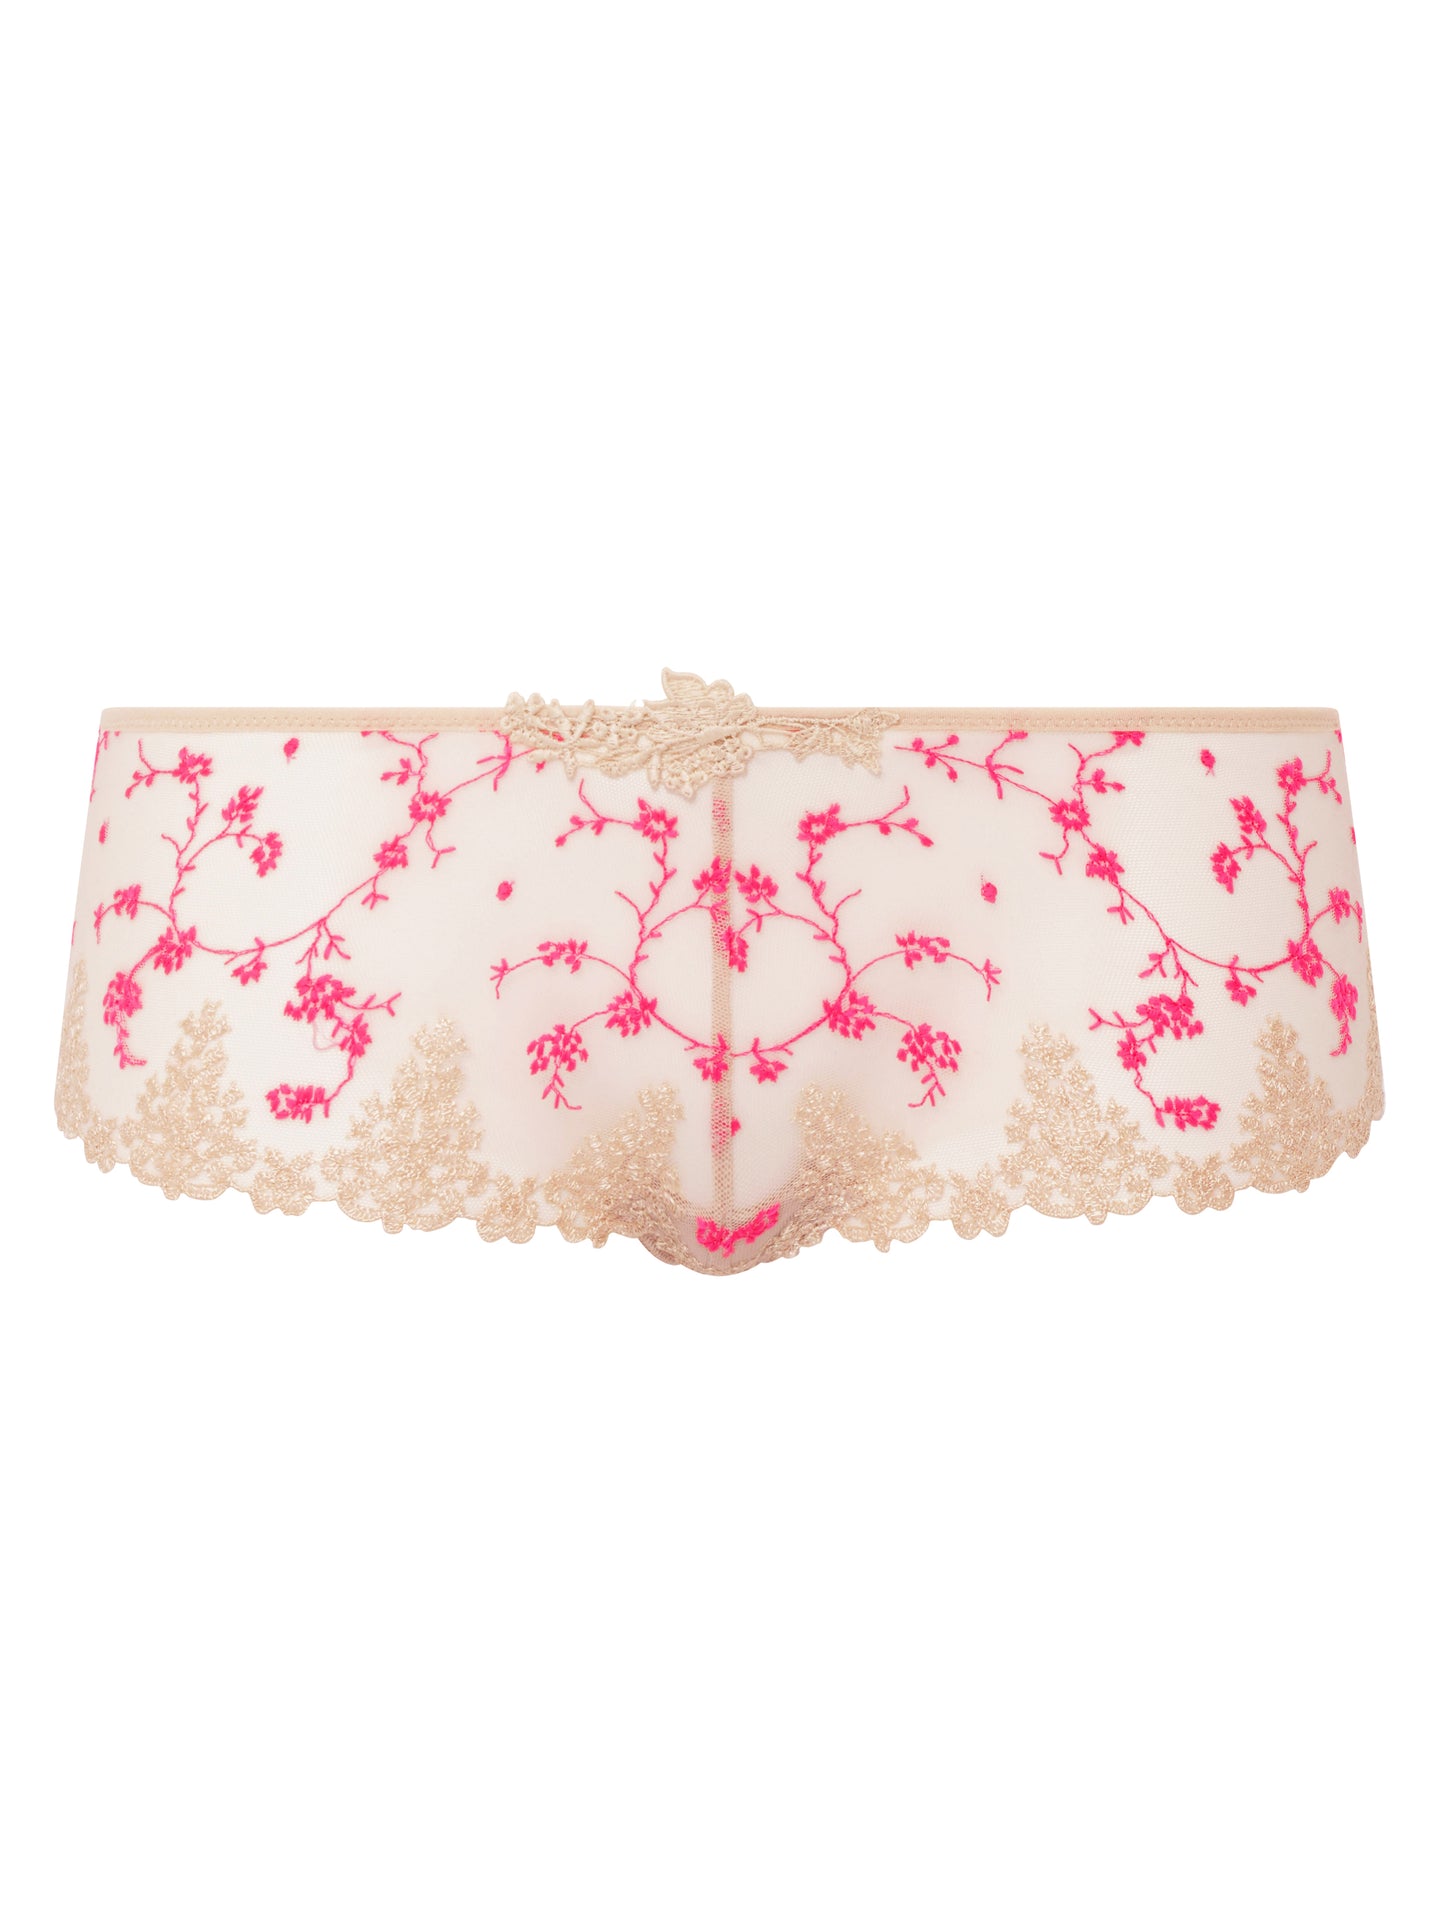 Passionata White Nights Shorty - Cappuccino/Fluo Pink